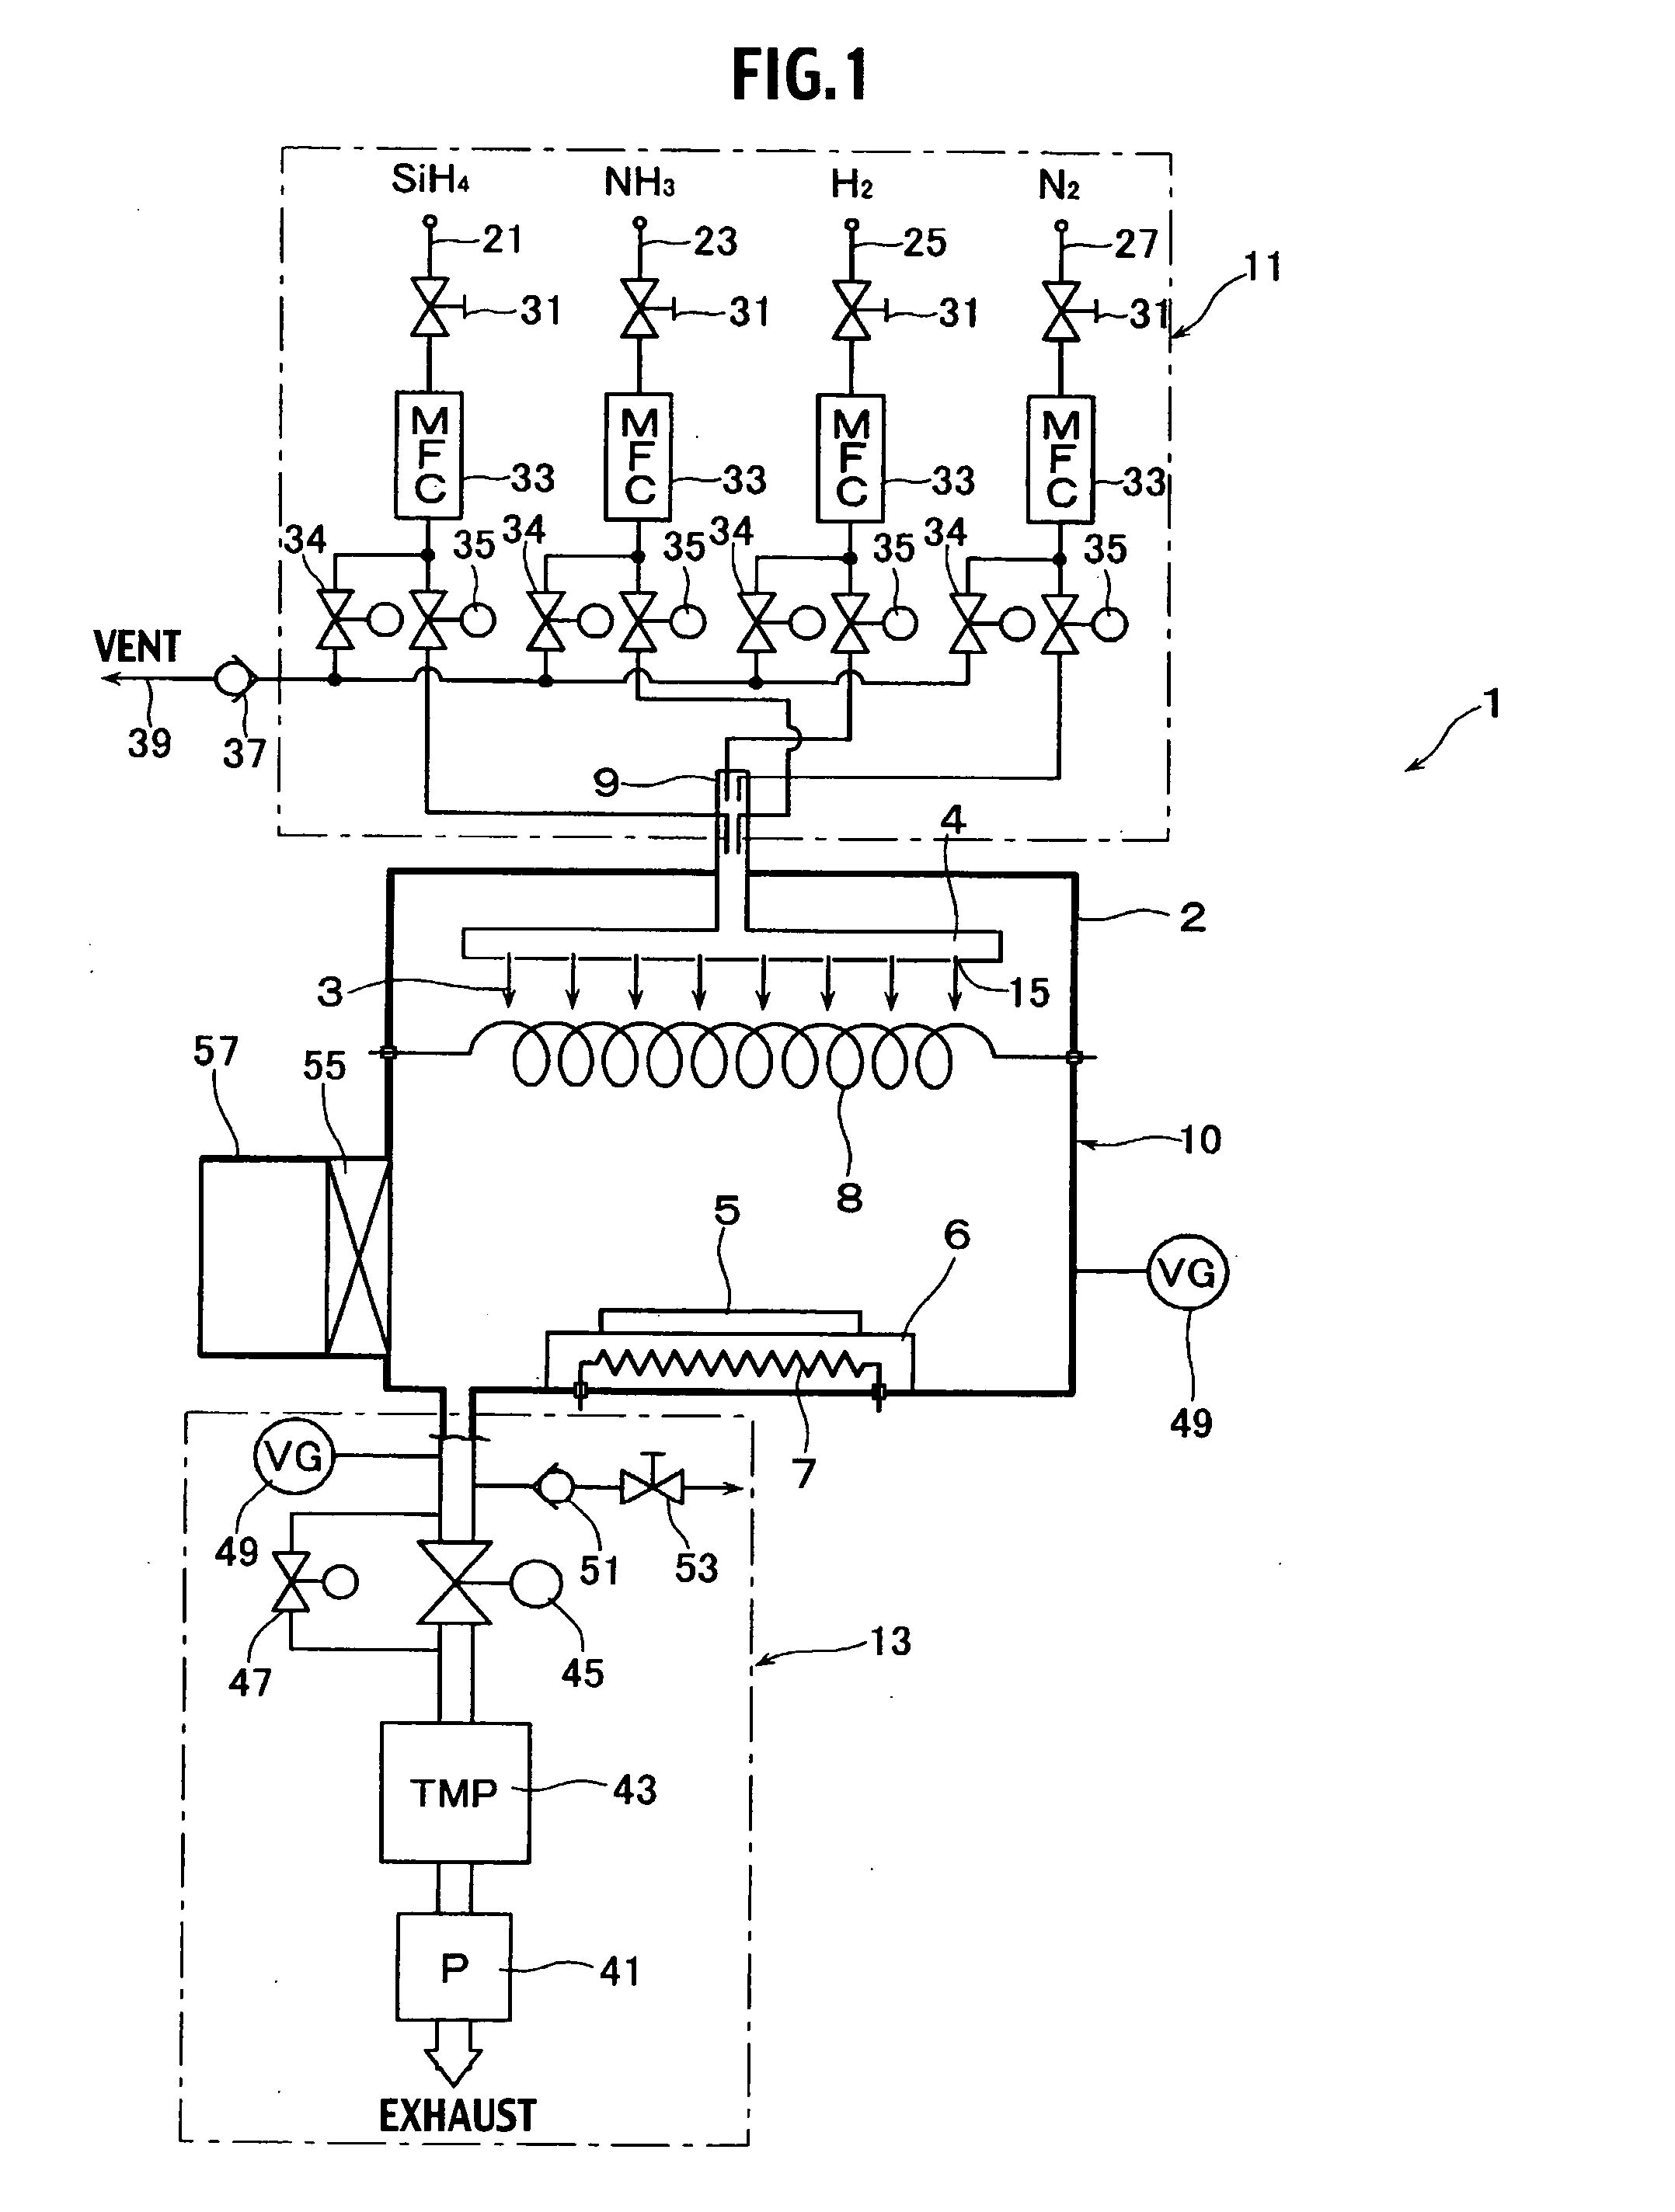 Unit-Layer Post-Processing Catalyst Chemical-Vapor-Deposition Apparatus and Its Film Forming Method